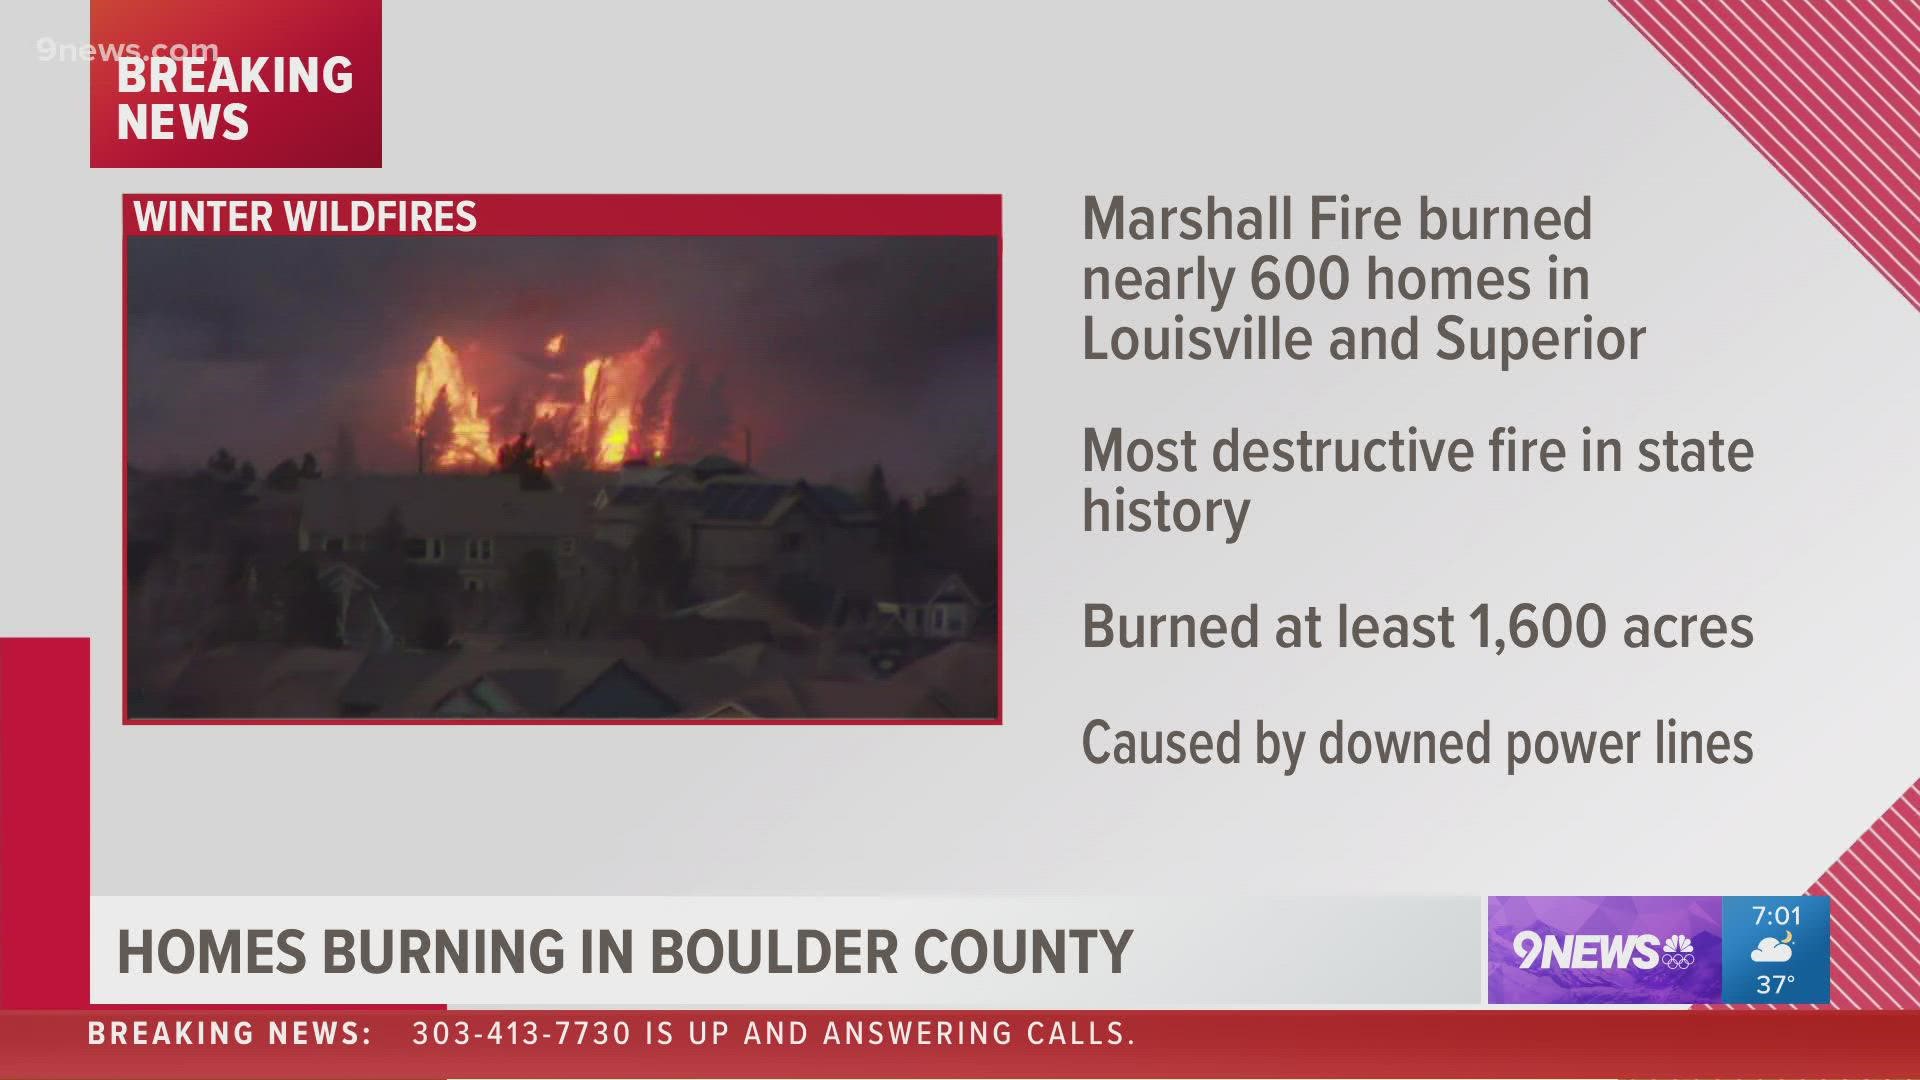 More than 500 structures have been destroyed in the Marshall Fire in Boulder County on Thursday, according to Boulder County Sheriff Joe Pelle.